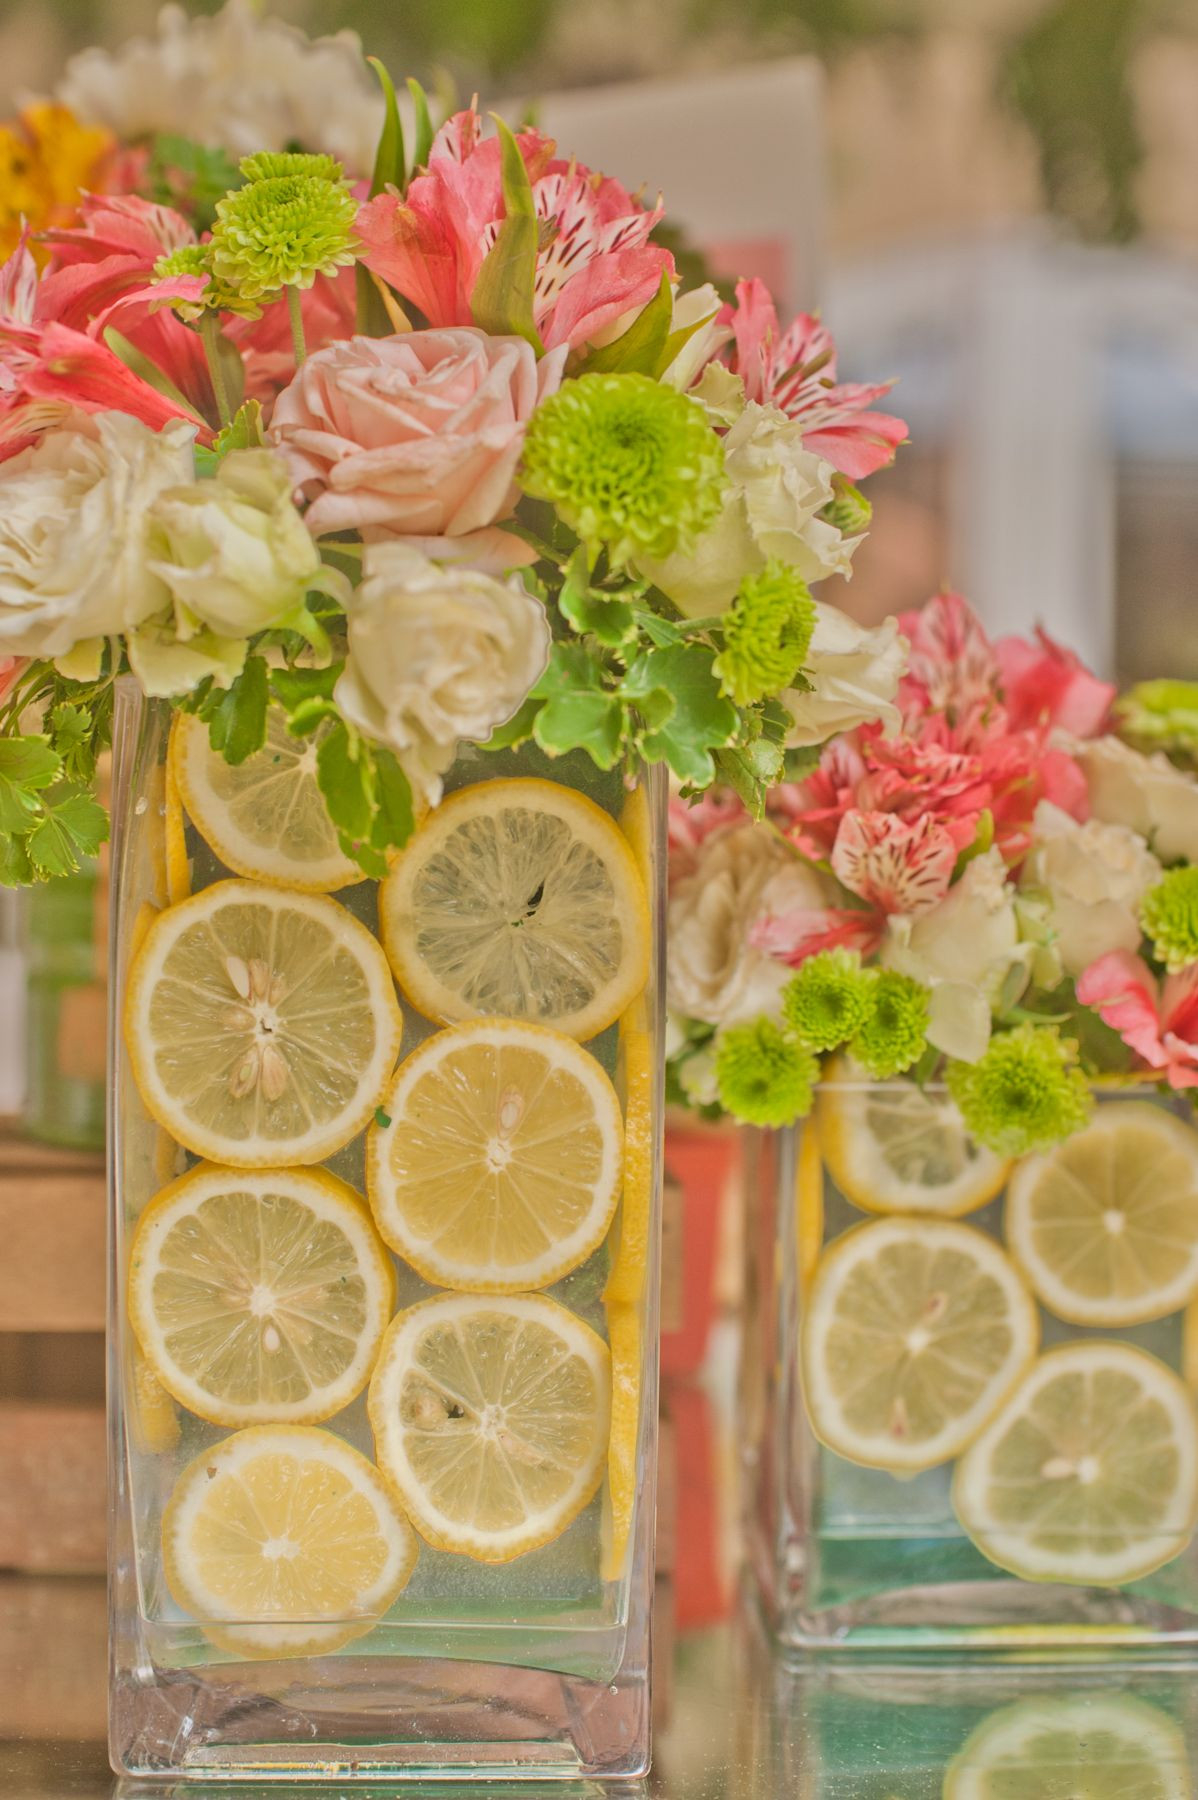 Spring Tea Party Ideas
 40 Tea Party Decorations To Jumpstart Your Planning